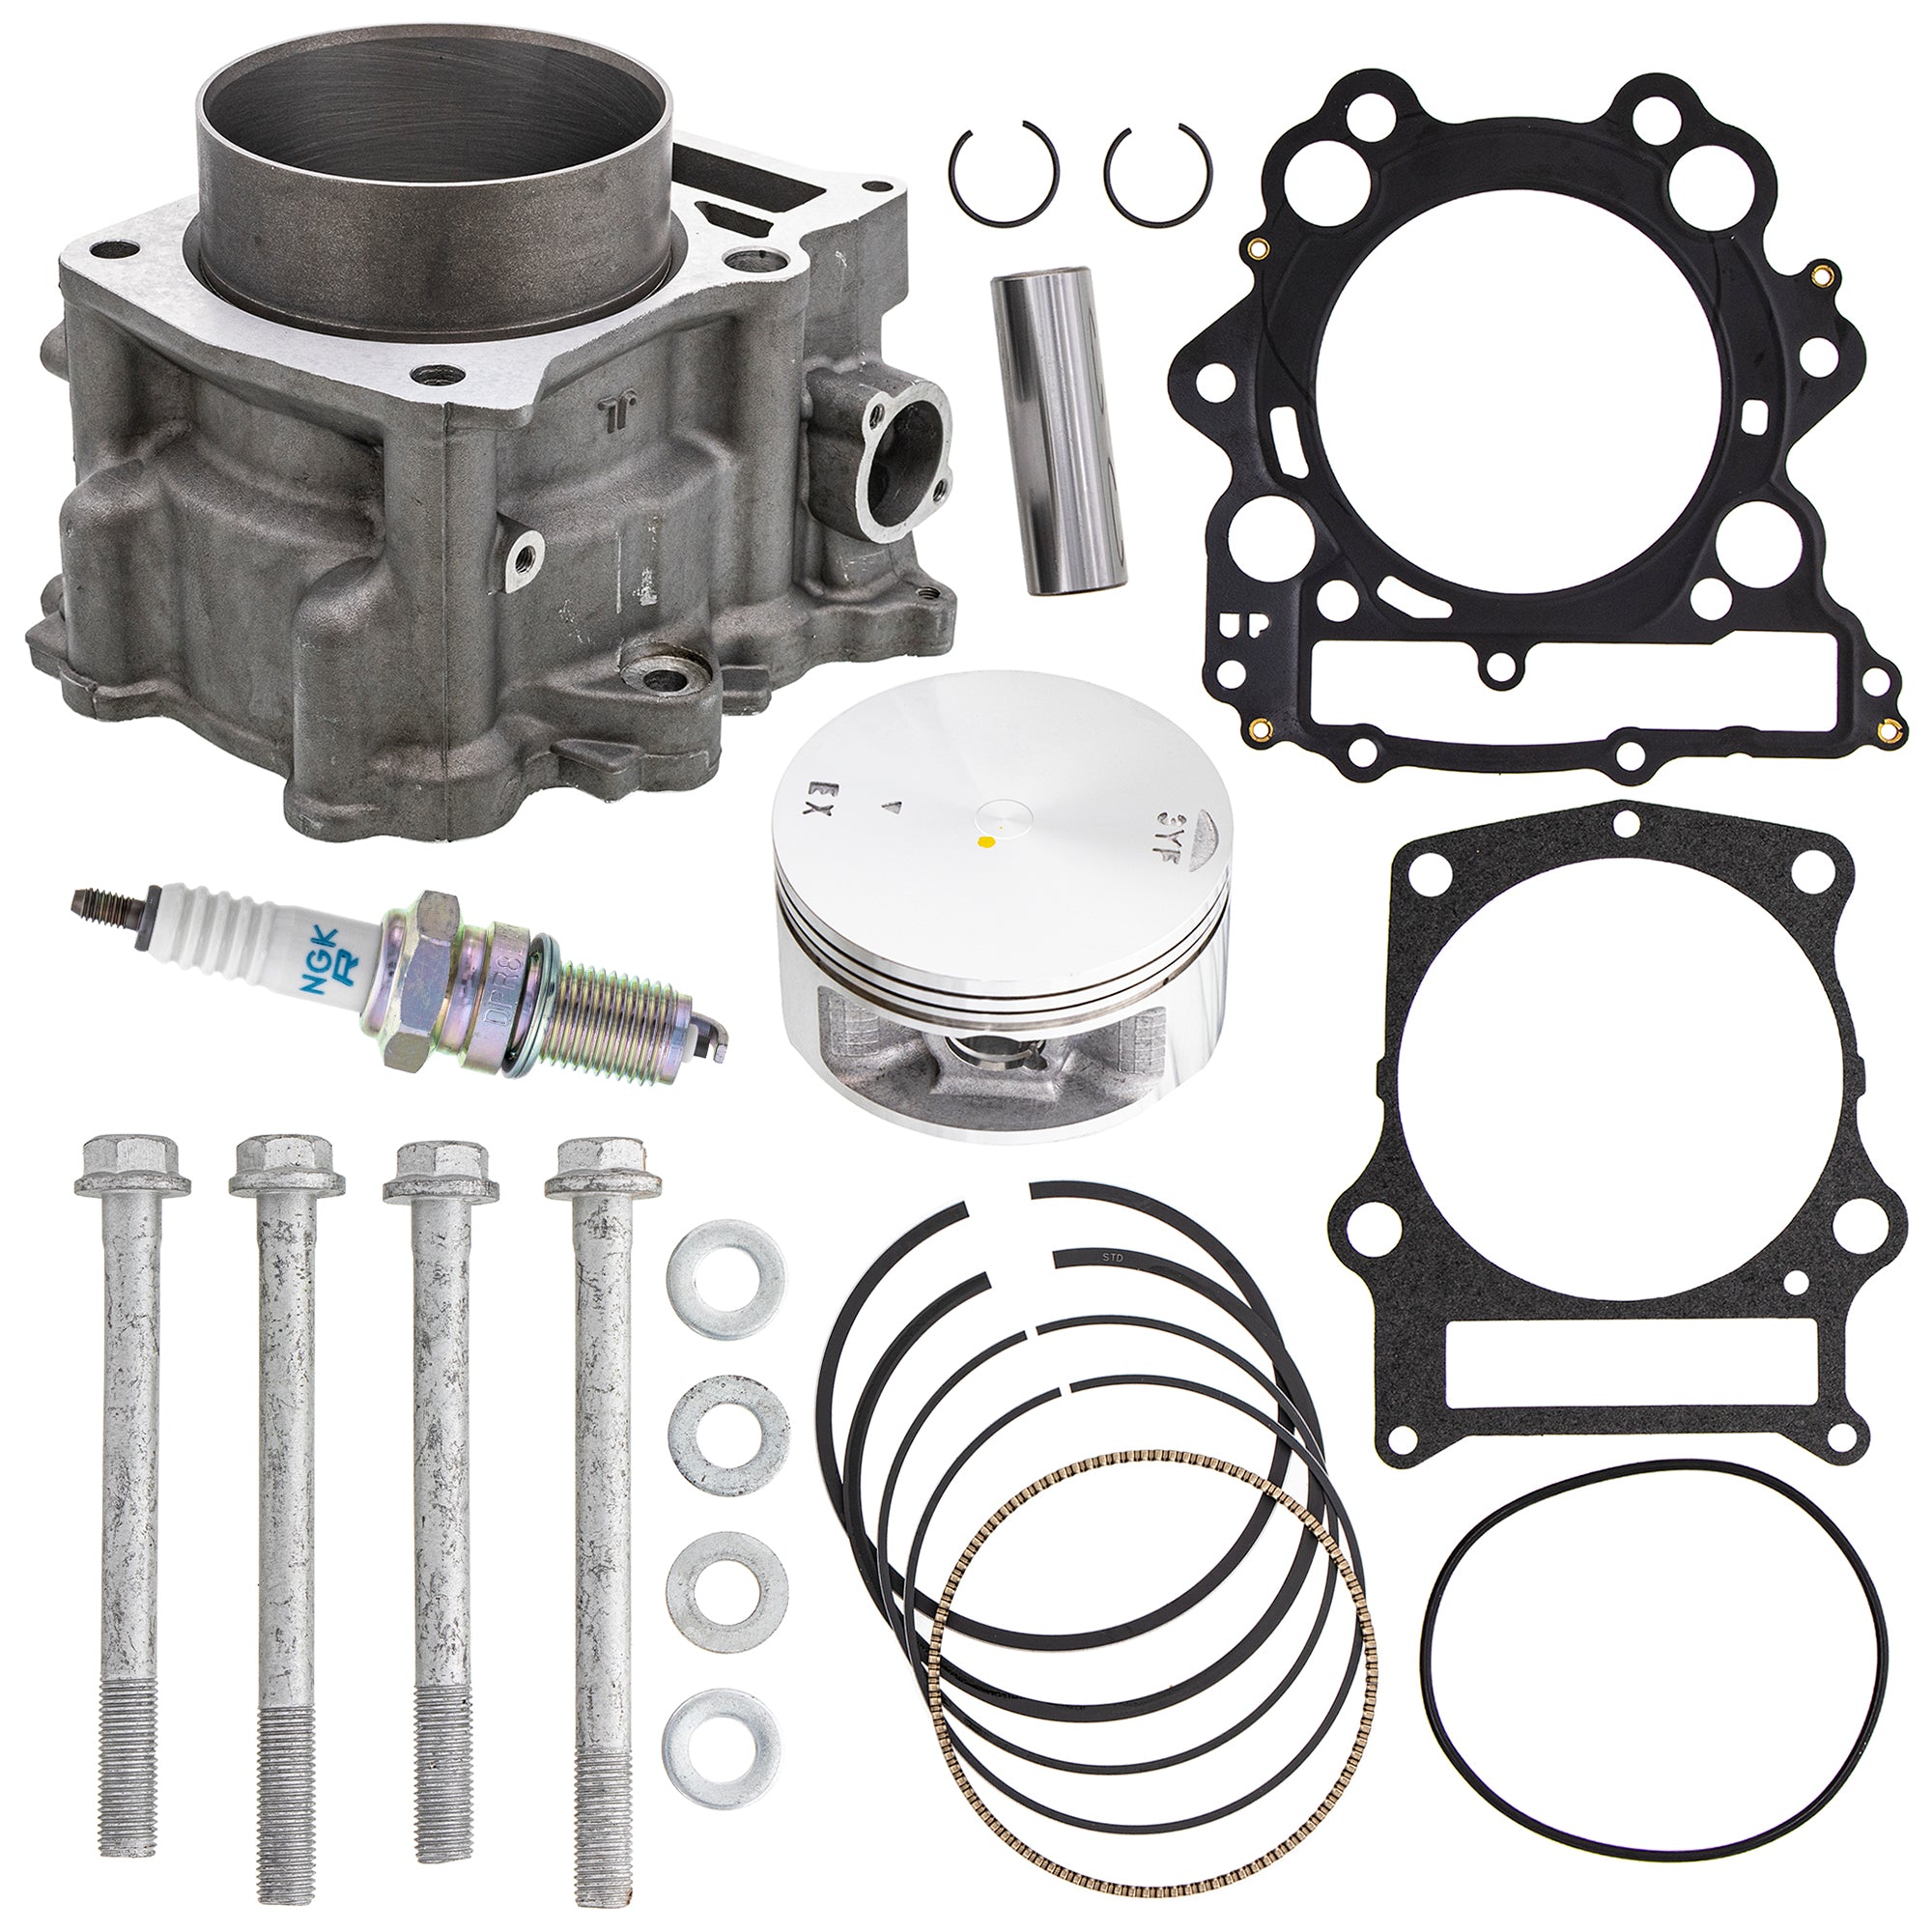 Cylinder Piston Top End Kit for zOTHER Yamaha Rhino Raptor Grizzly DPR-8EA90-00-00 NICHE MK1001000